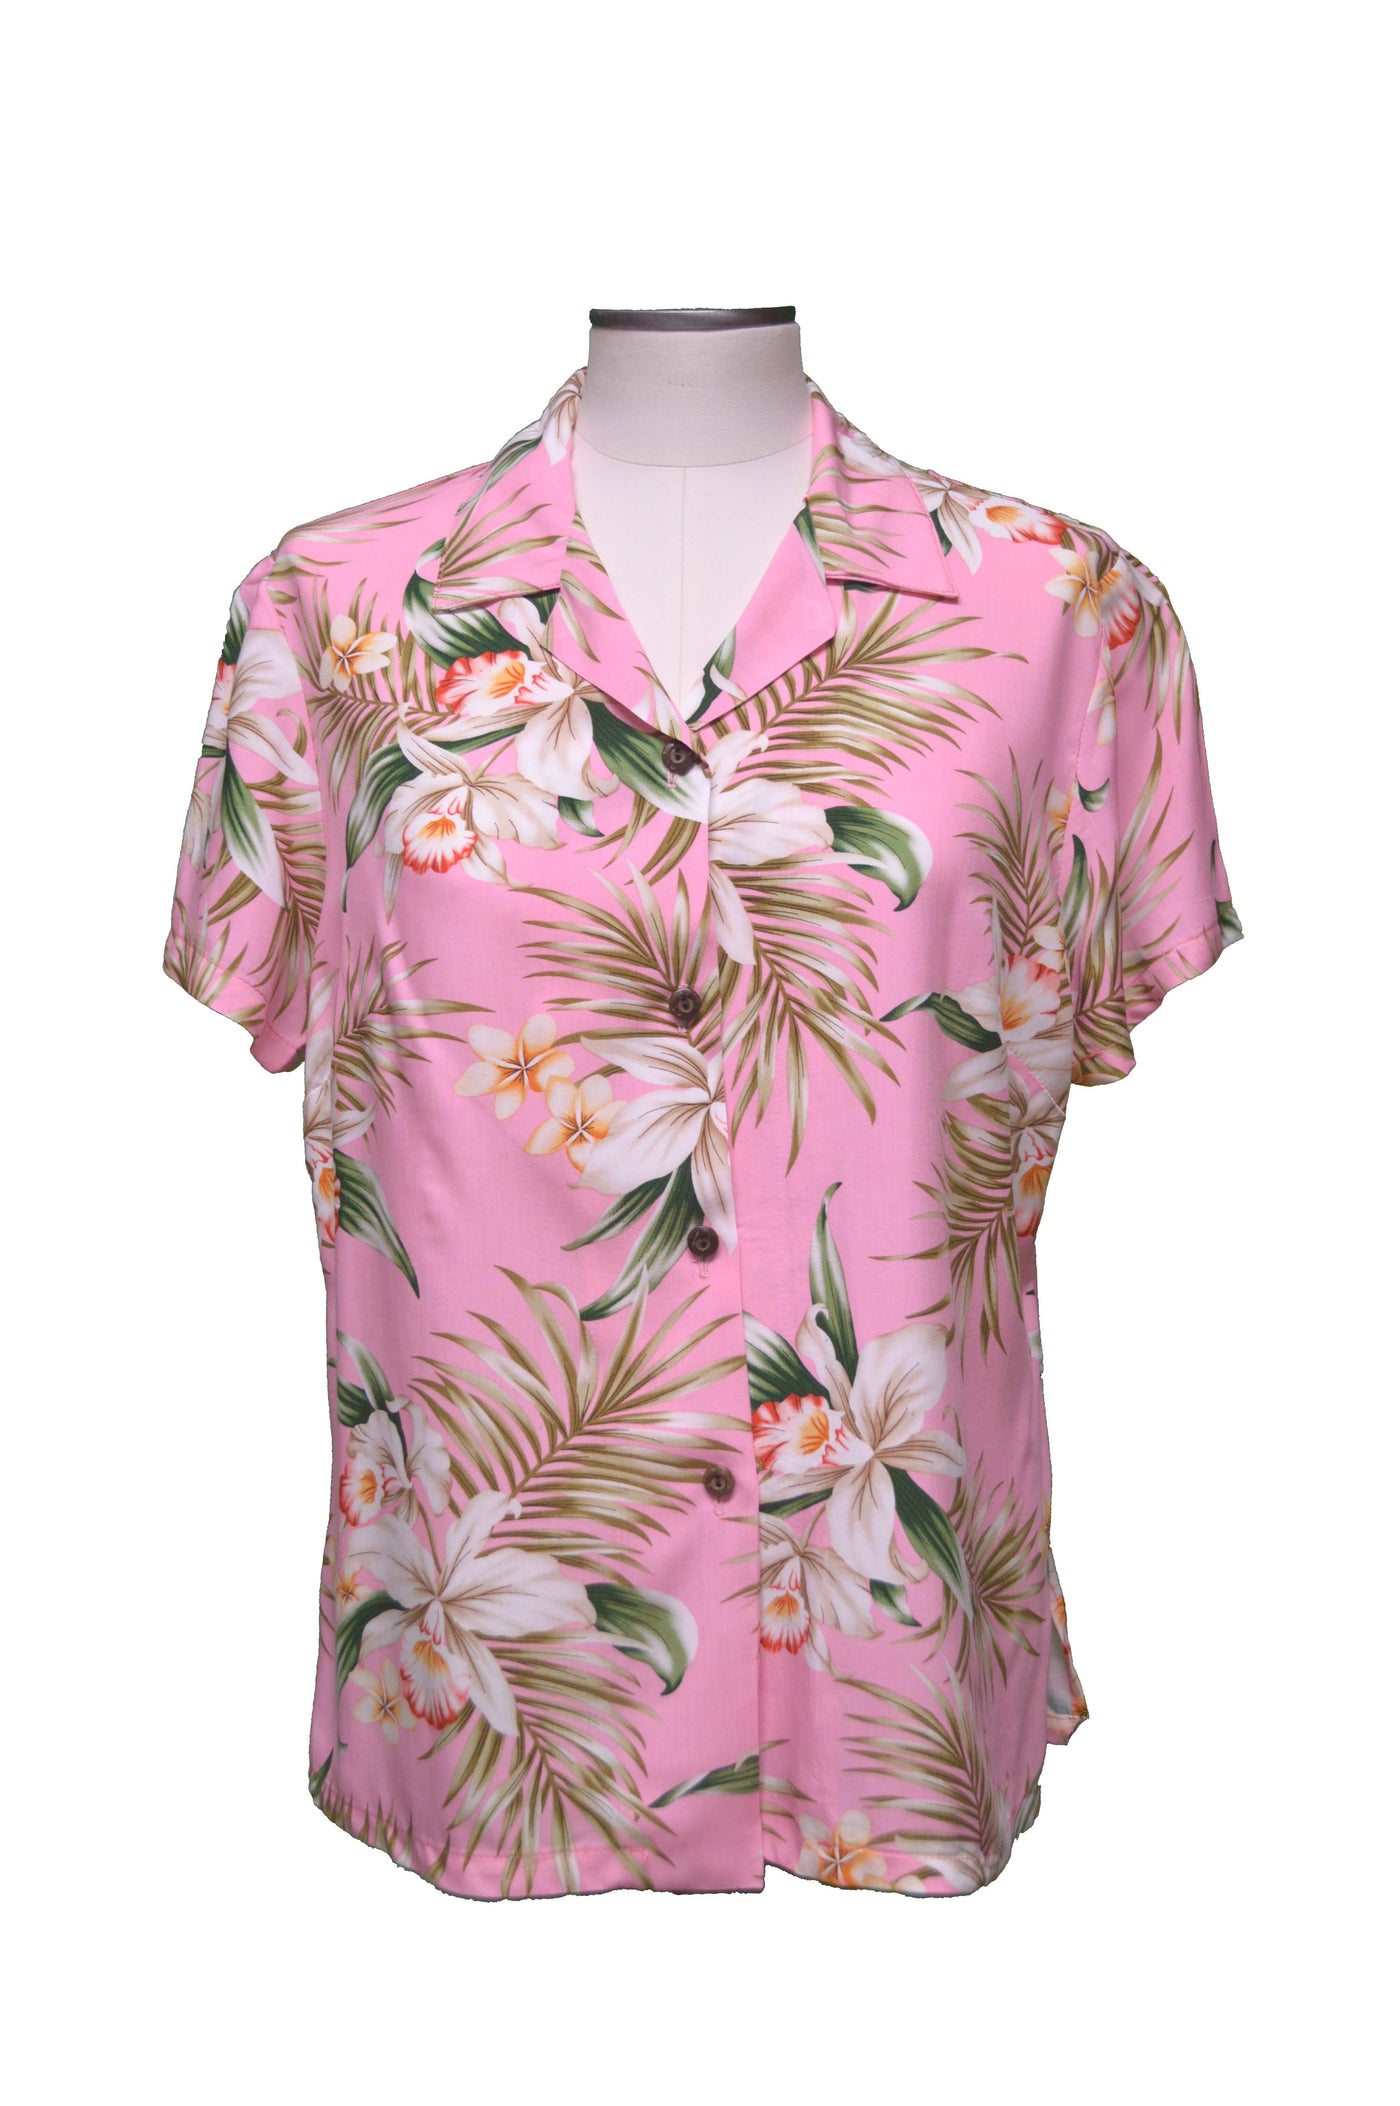 Classic Orchid Women's Aloha Rayon Blouses